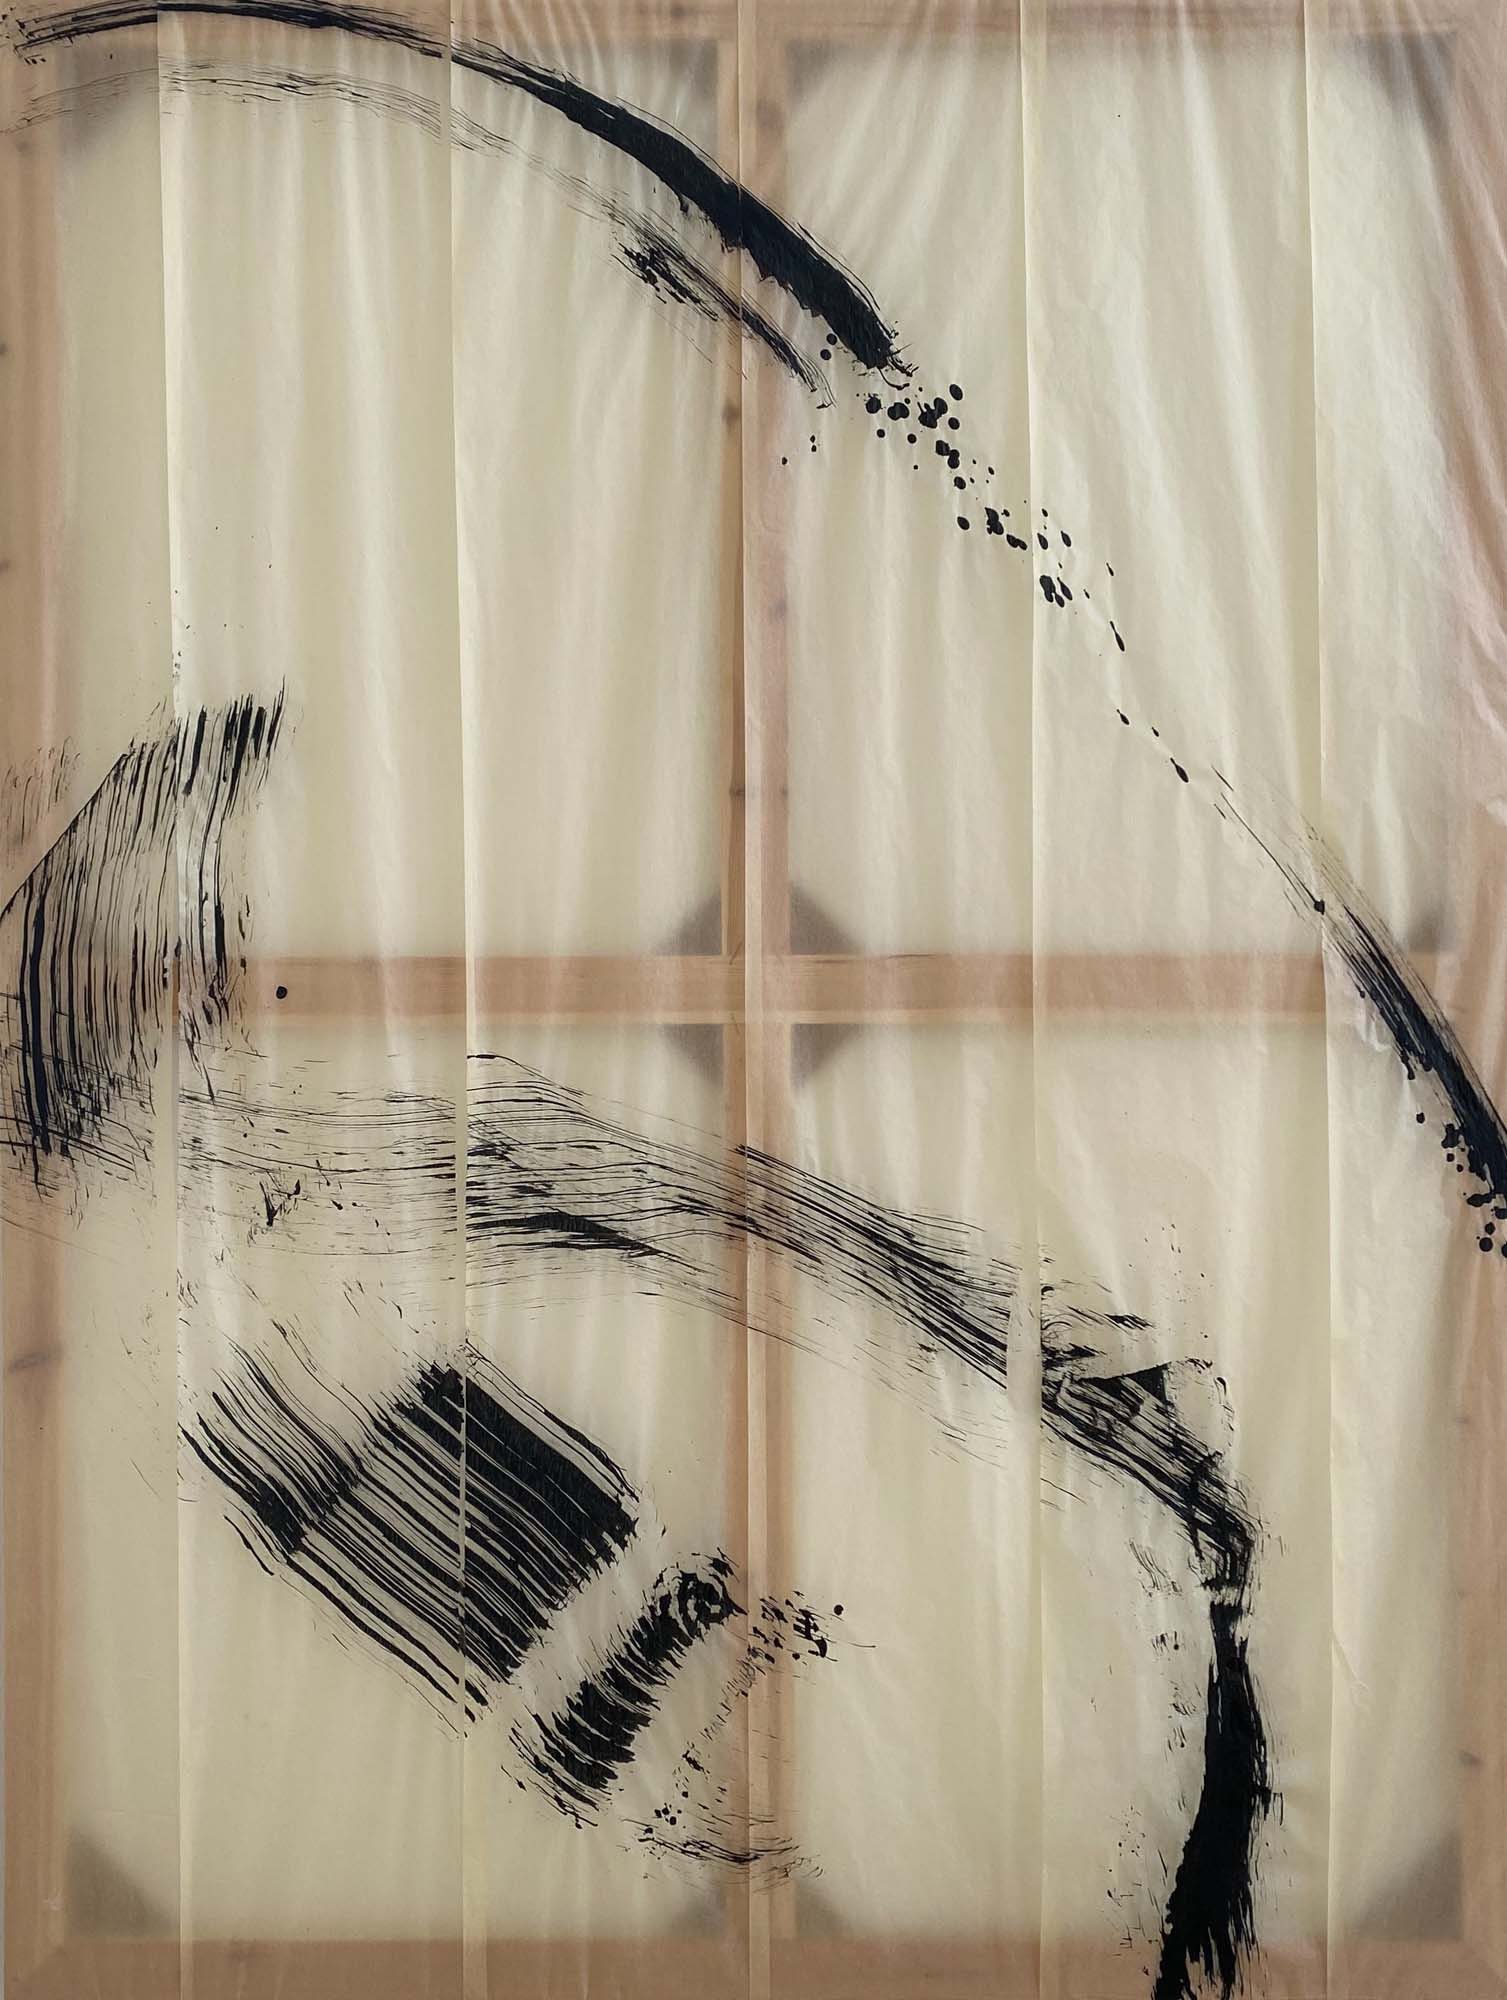 Photo of a painting of ink gestures on thin translucent paper 